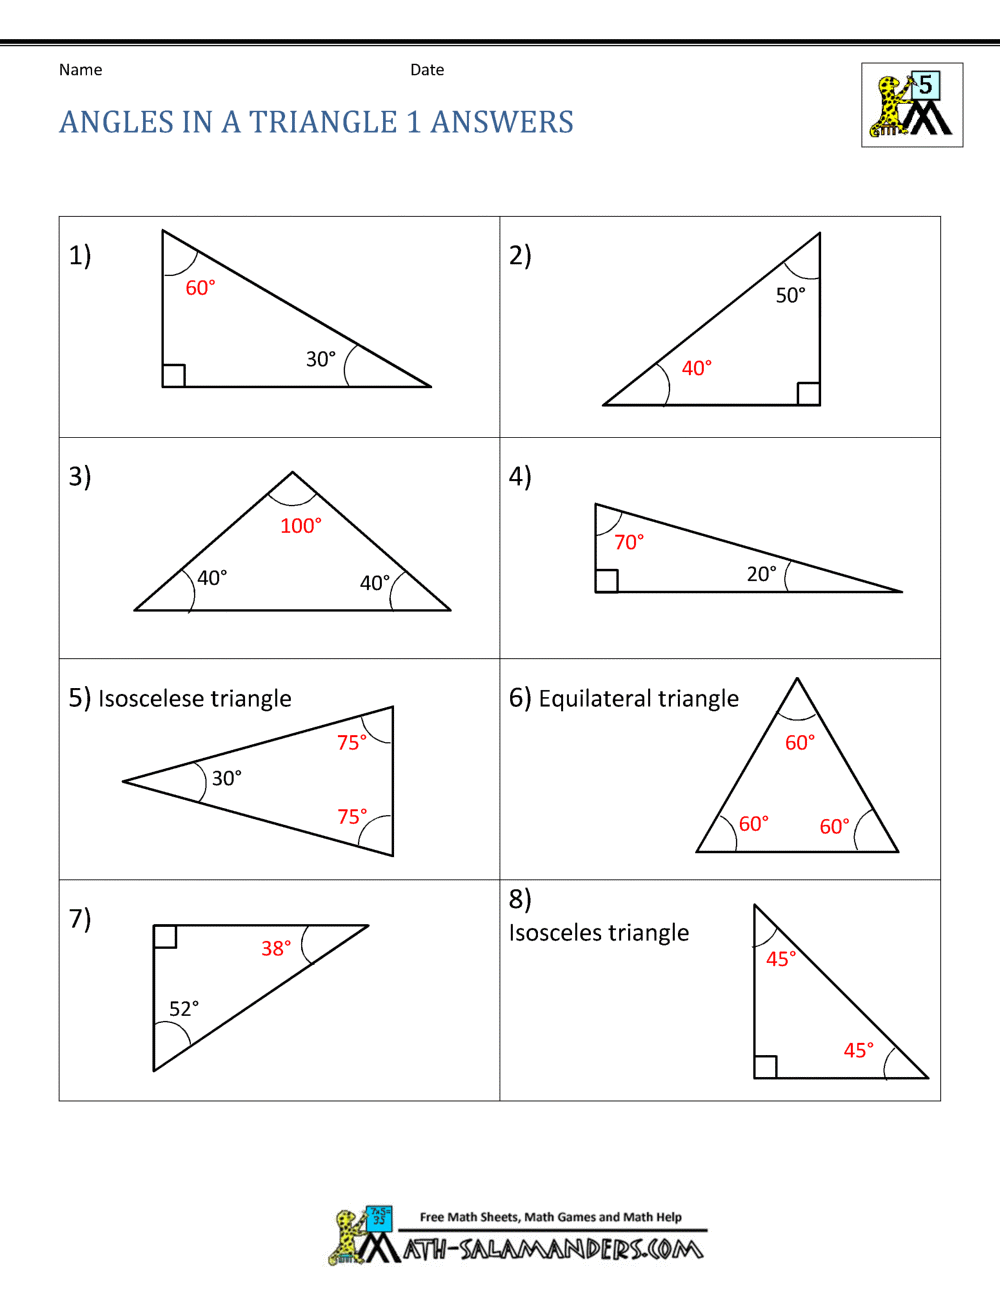 11th Grade Geometry With Triangle Angle Sum Worksheet